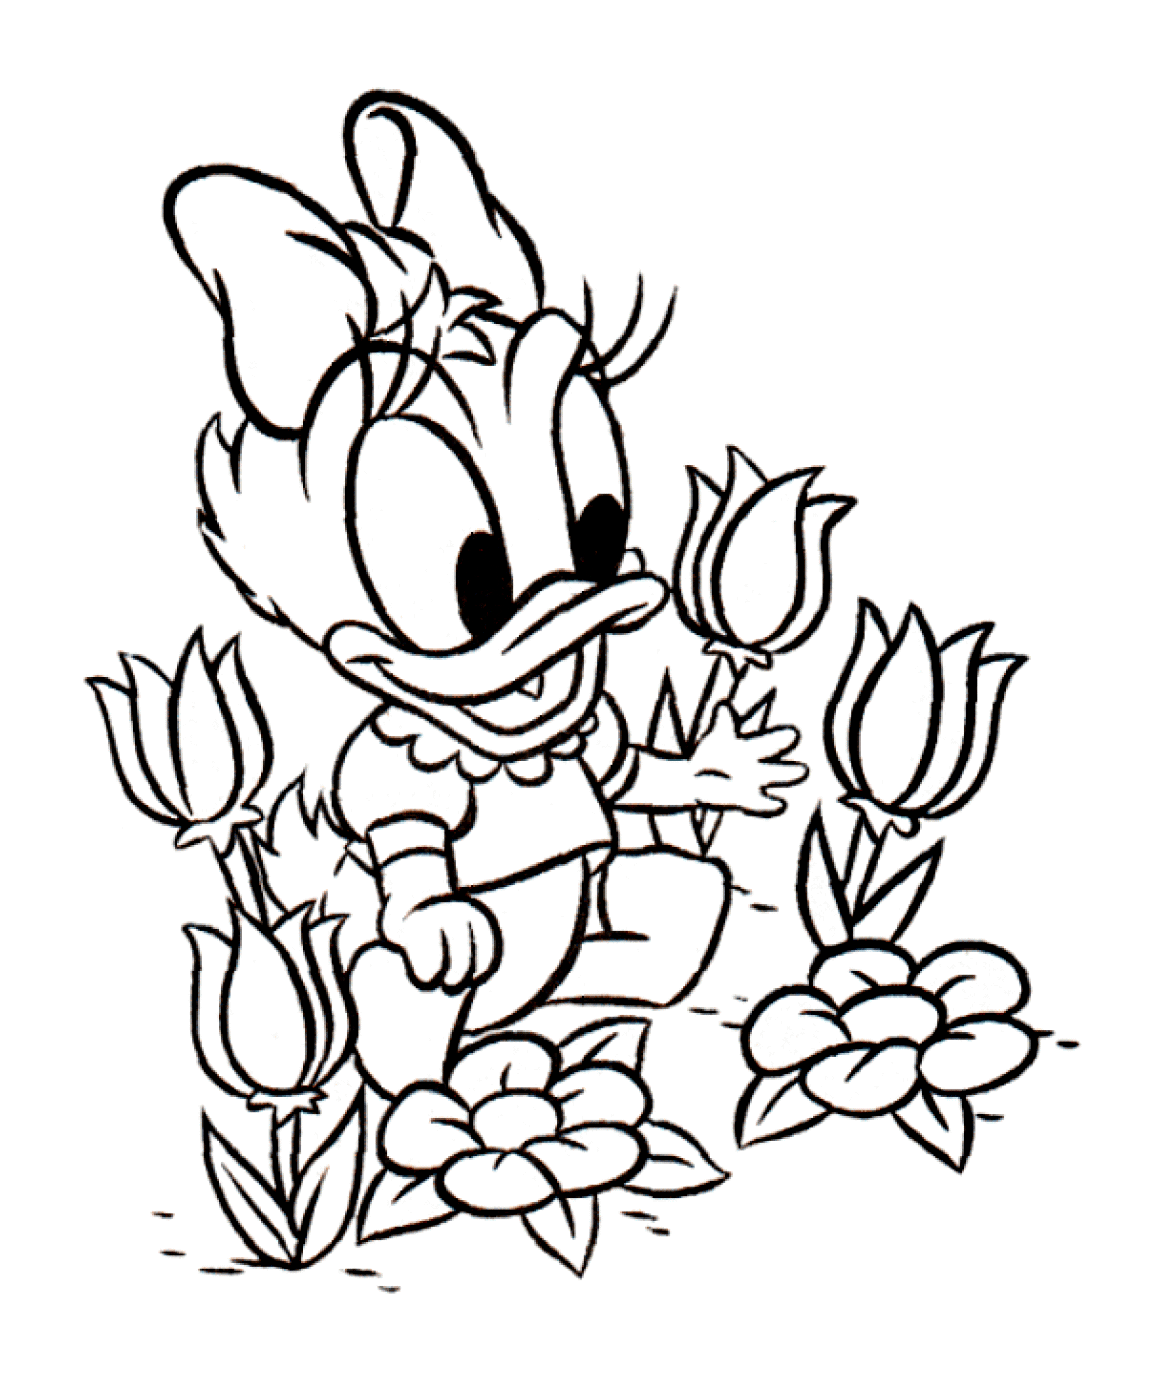 Download Daisy free to color for kids - Daisy Kids Coloring Pages